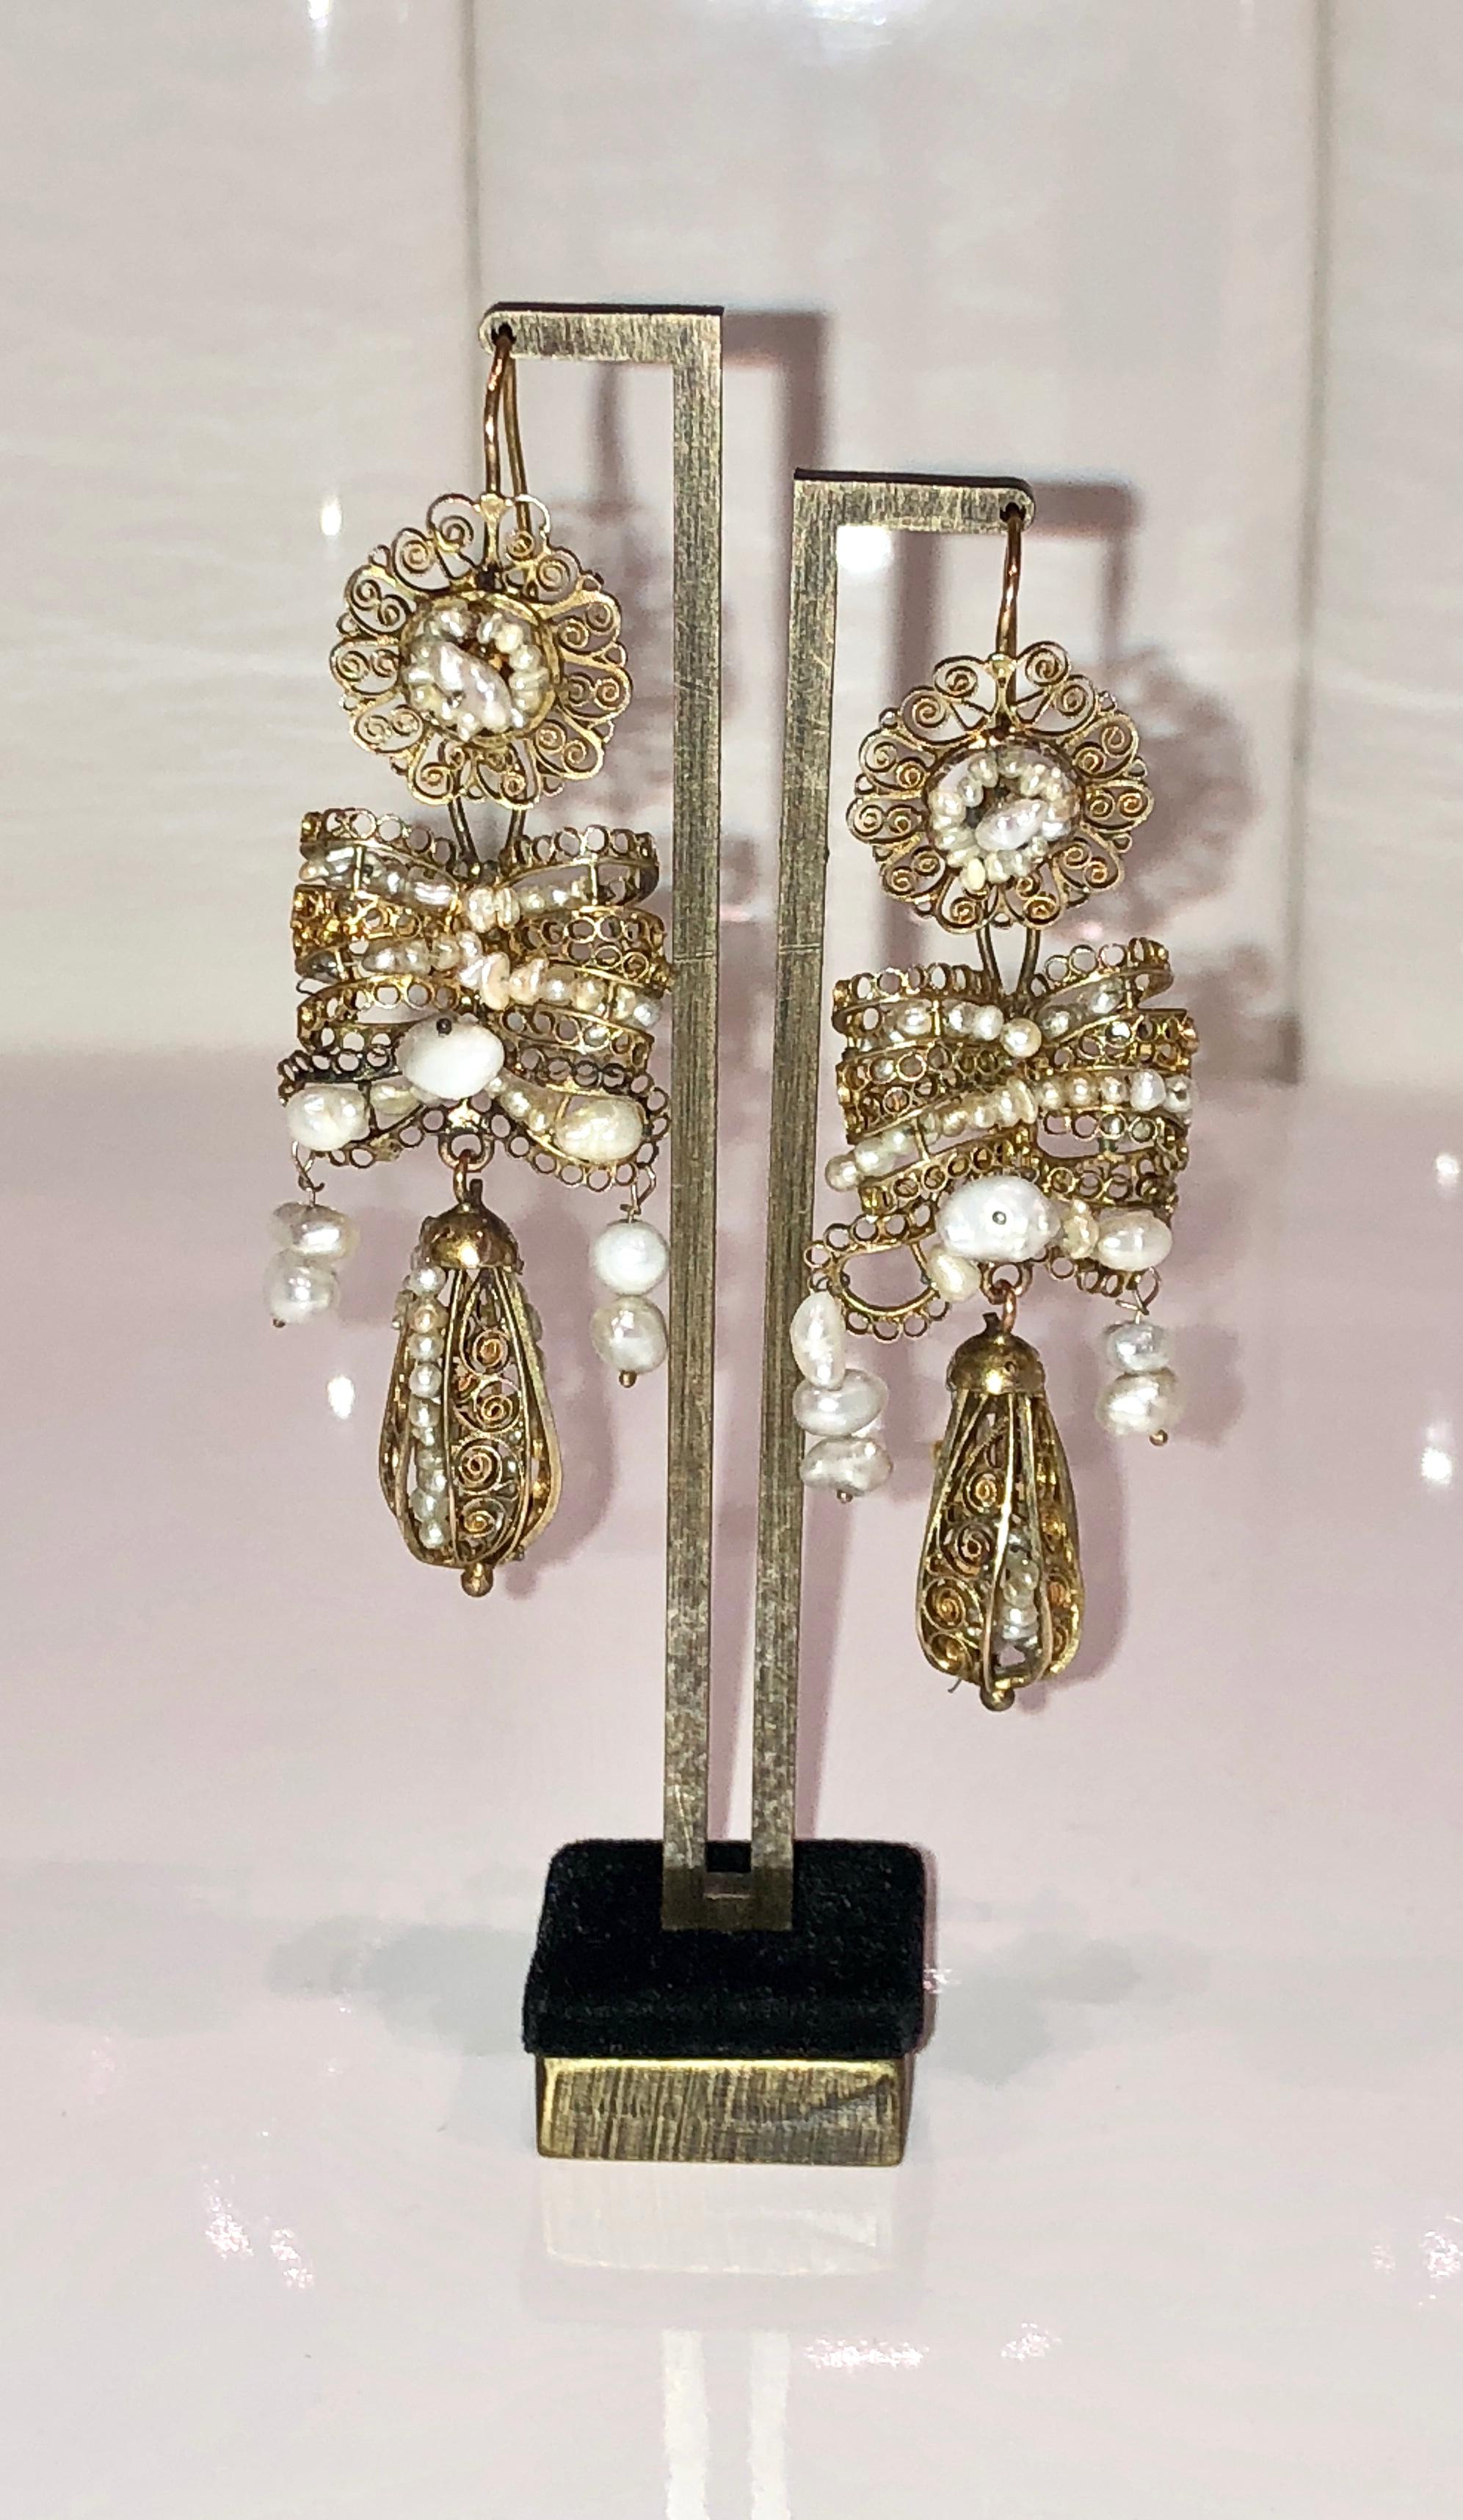 Antique Spanish girandolle earrings set in 18k yellow gold filagree work with sead pearls and fresh water pearls , circa 1890s